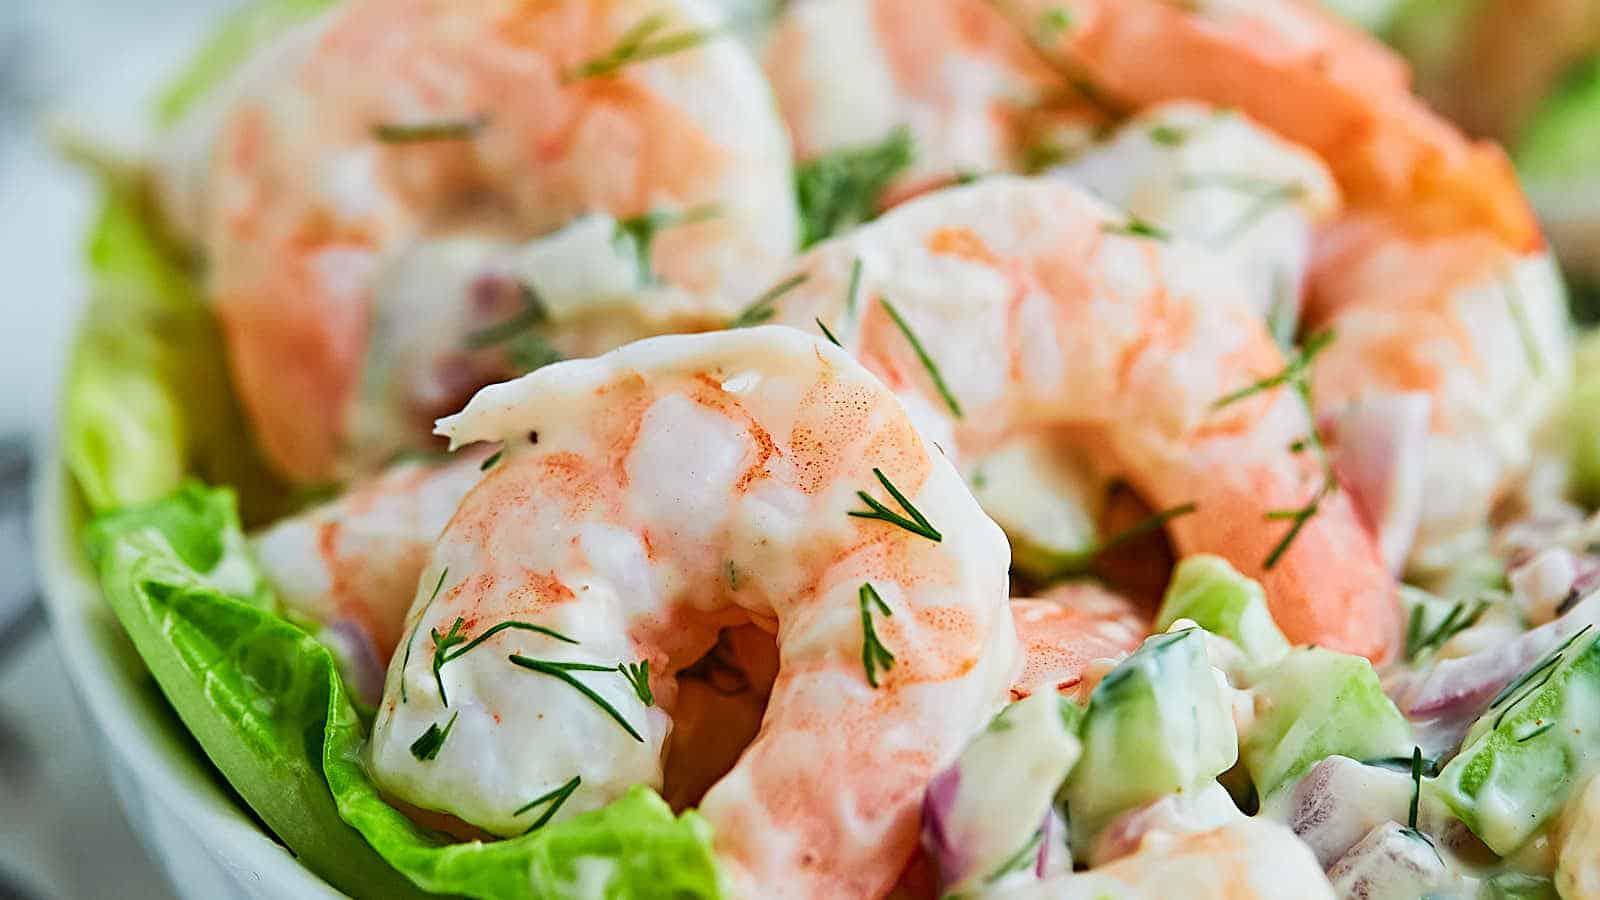 A bowl of shrimp salad with lettuce and dill.